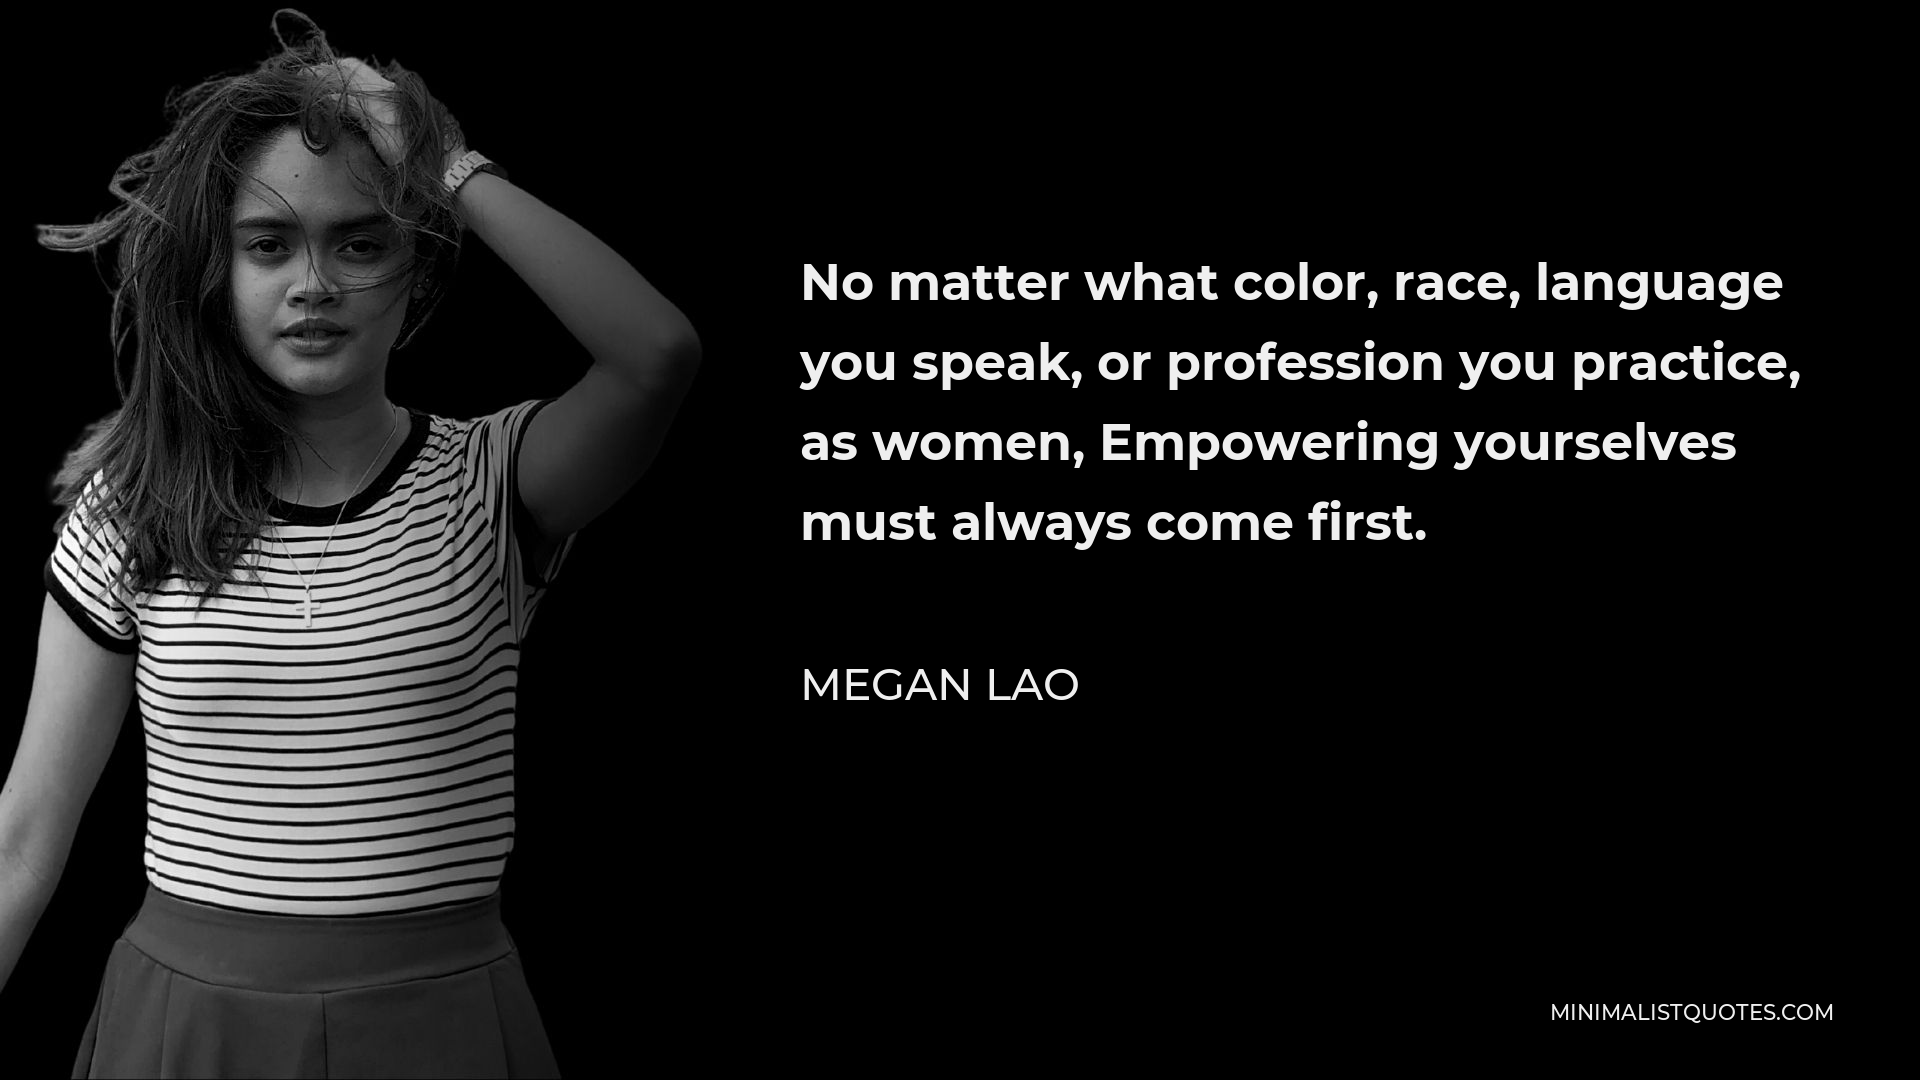 Megan Lao Quote - No matter what color, race, language you speak, or profession you practice, as women, Empowering yourselves must always come first.